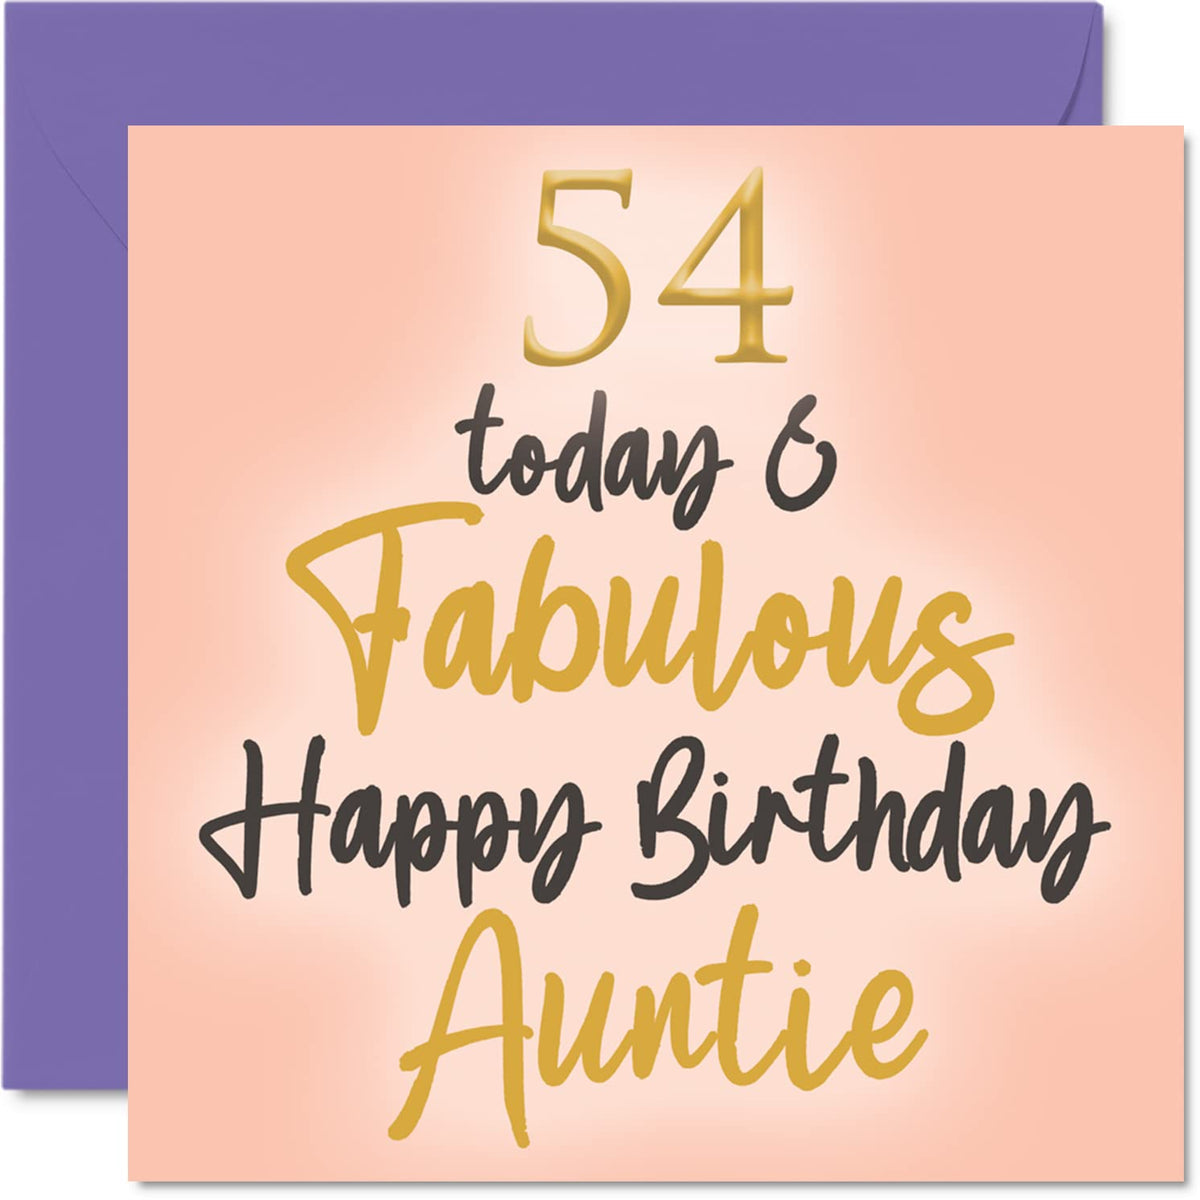 Fabulous 54th Birthday Cards for Auntie - 54 Today & Fabulous - Happy Birthday Card for Auntie from Nephew Niece, Auntie Birthday Gifts, 145mm x 145mm Lovely Greeting Cards Gift for Aunt Aunty